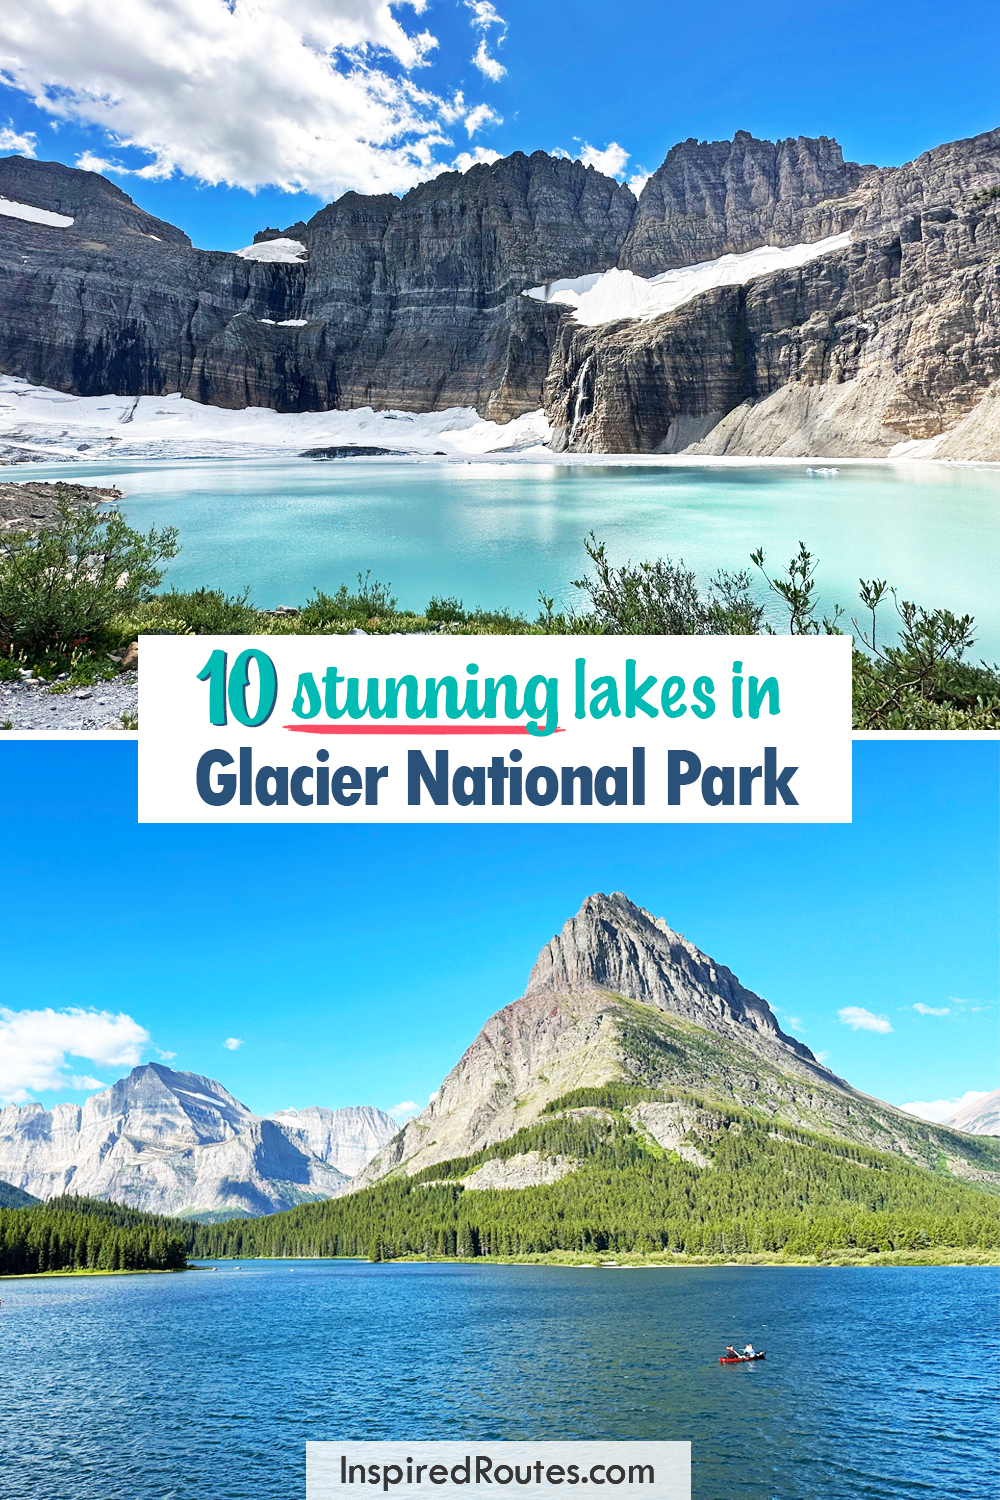 two photos of lakes and mountains with text that reads 10 stunning lakes in Glacier National Park